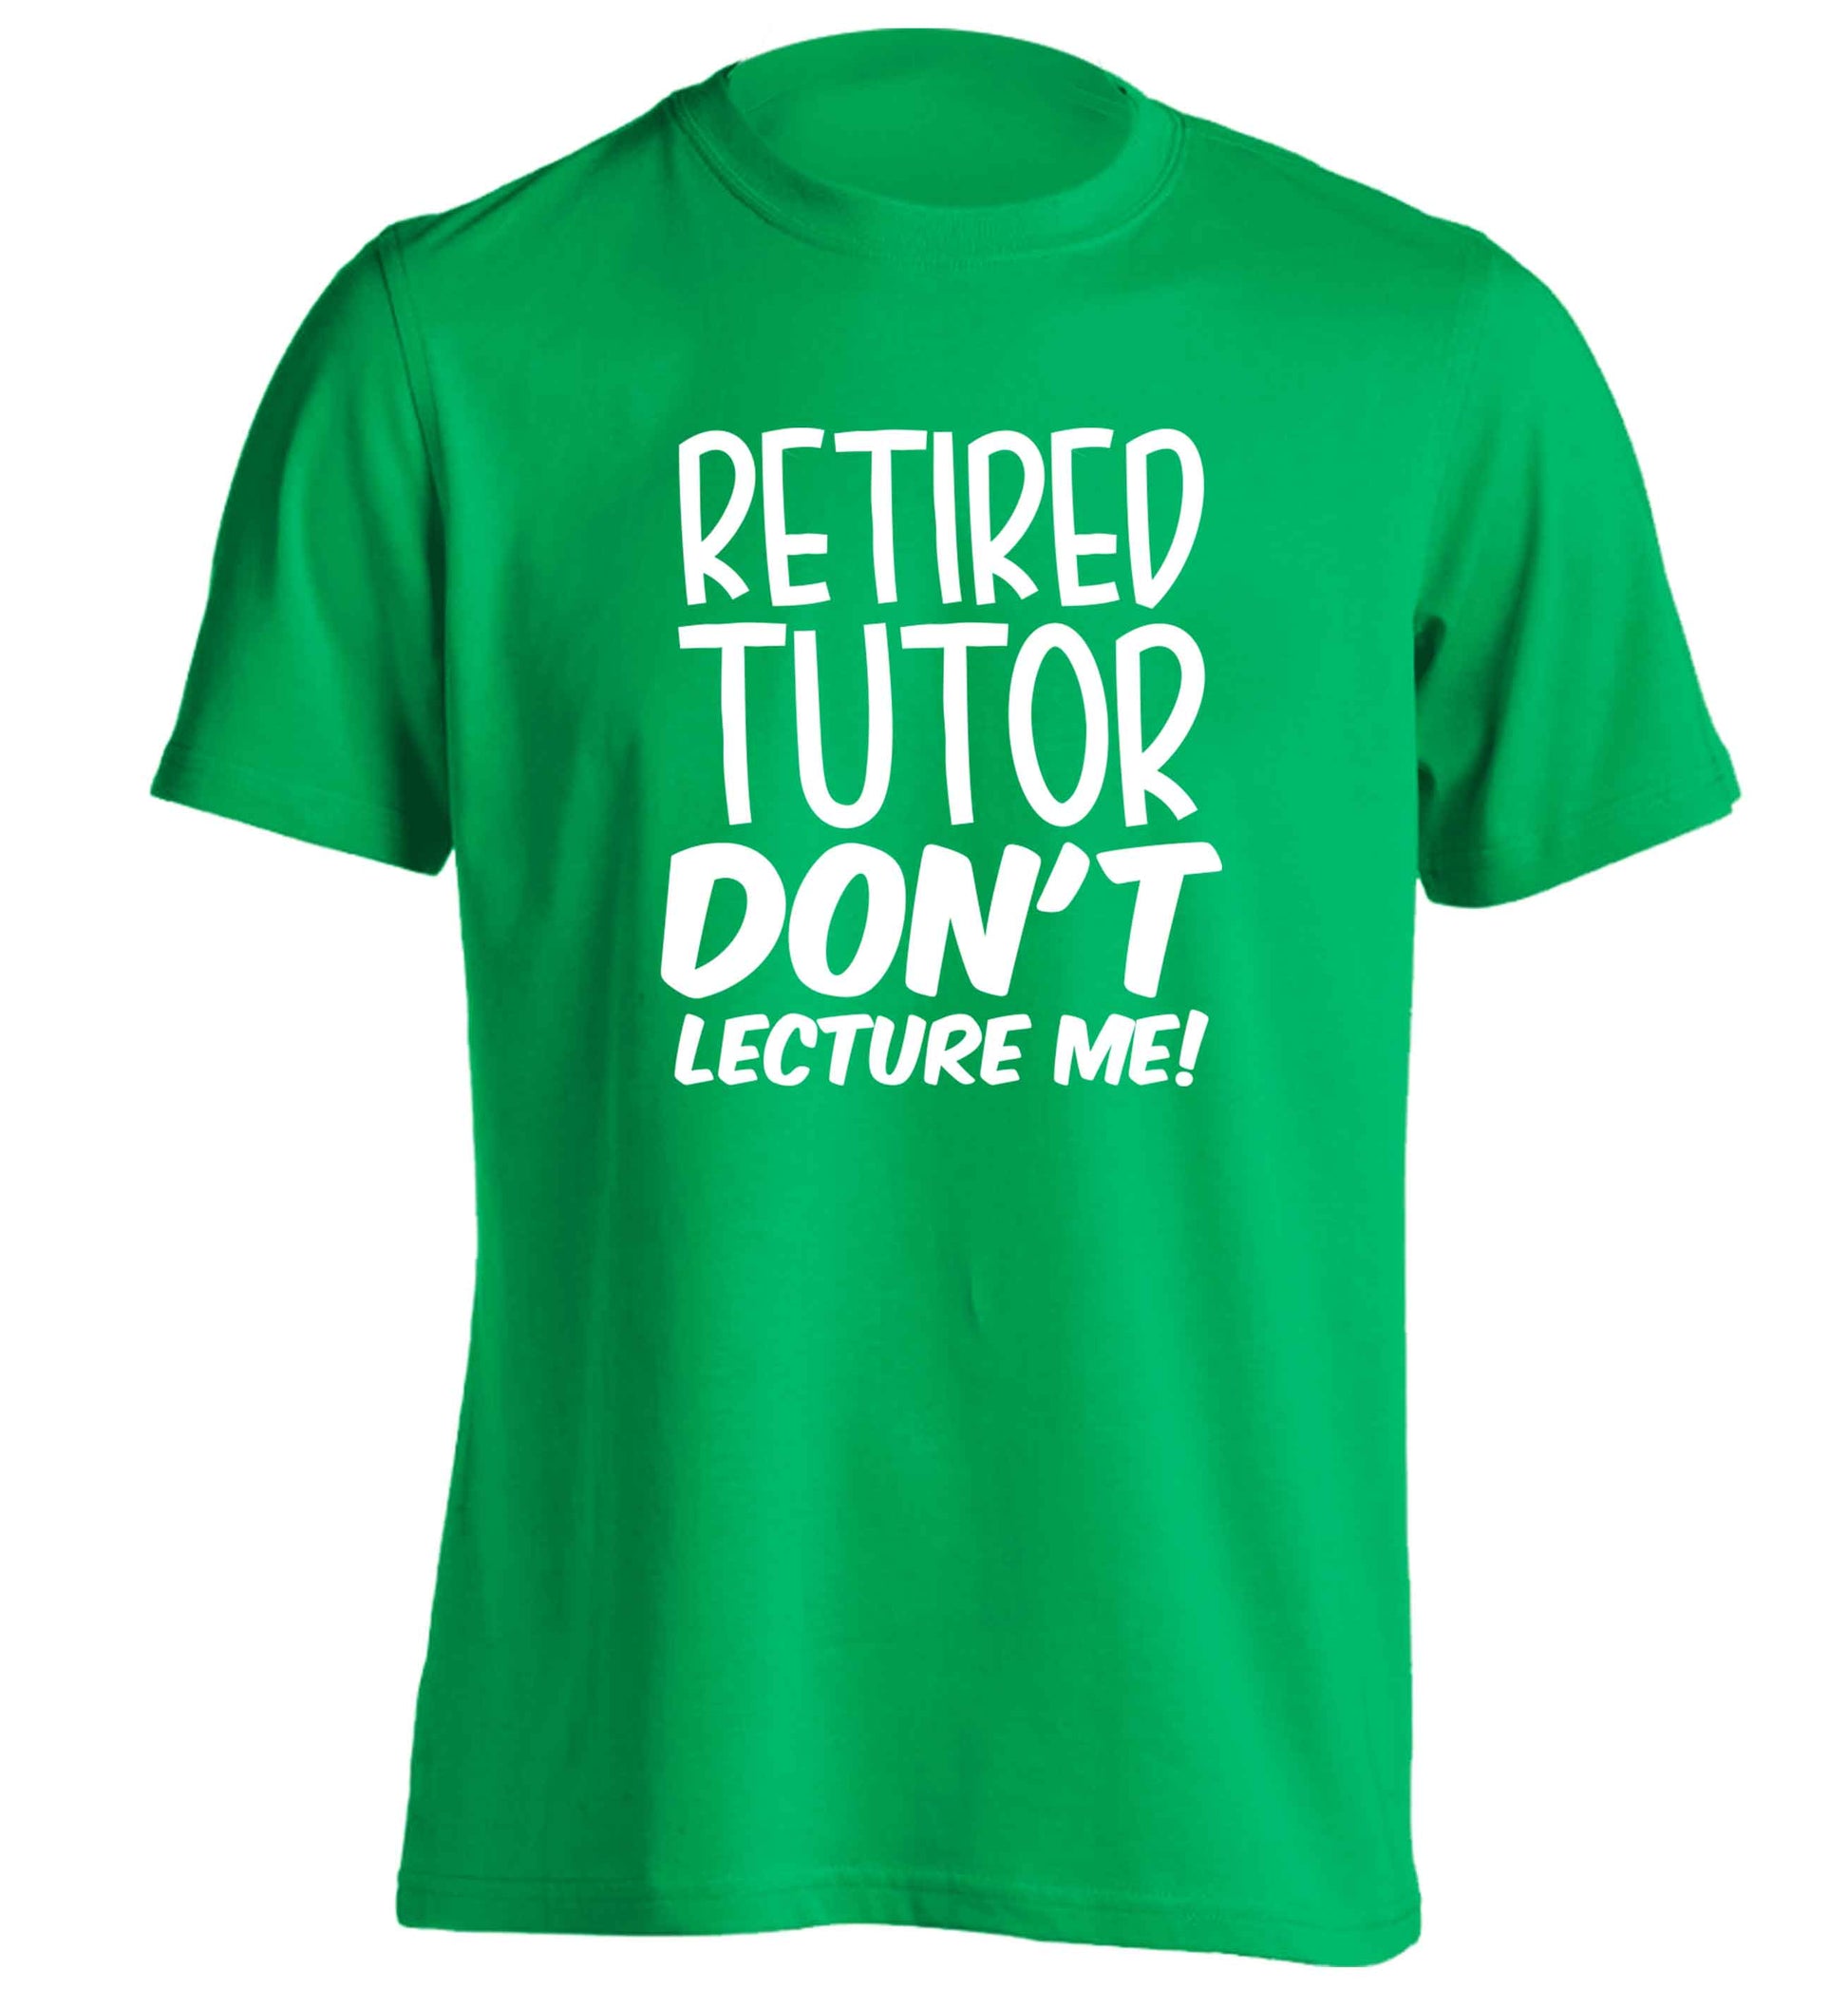 Retired tutor don't lecture me! adults unisex green Tshirt 2XL